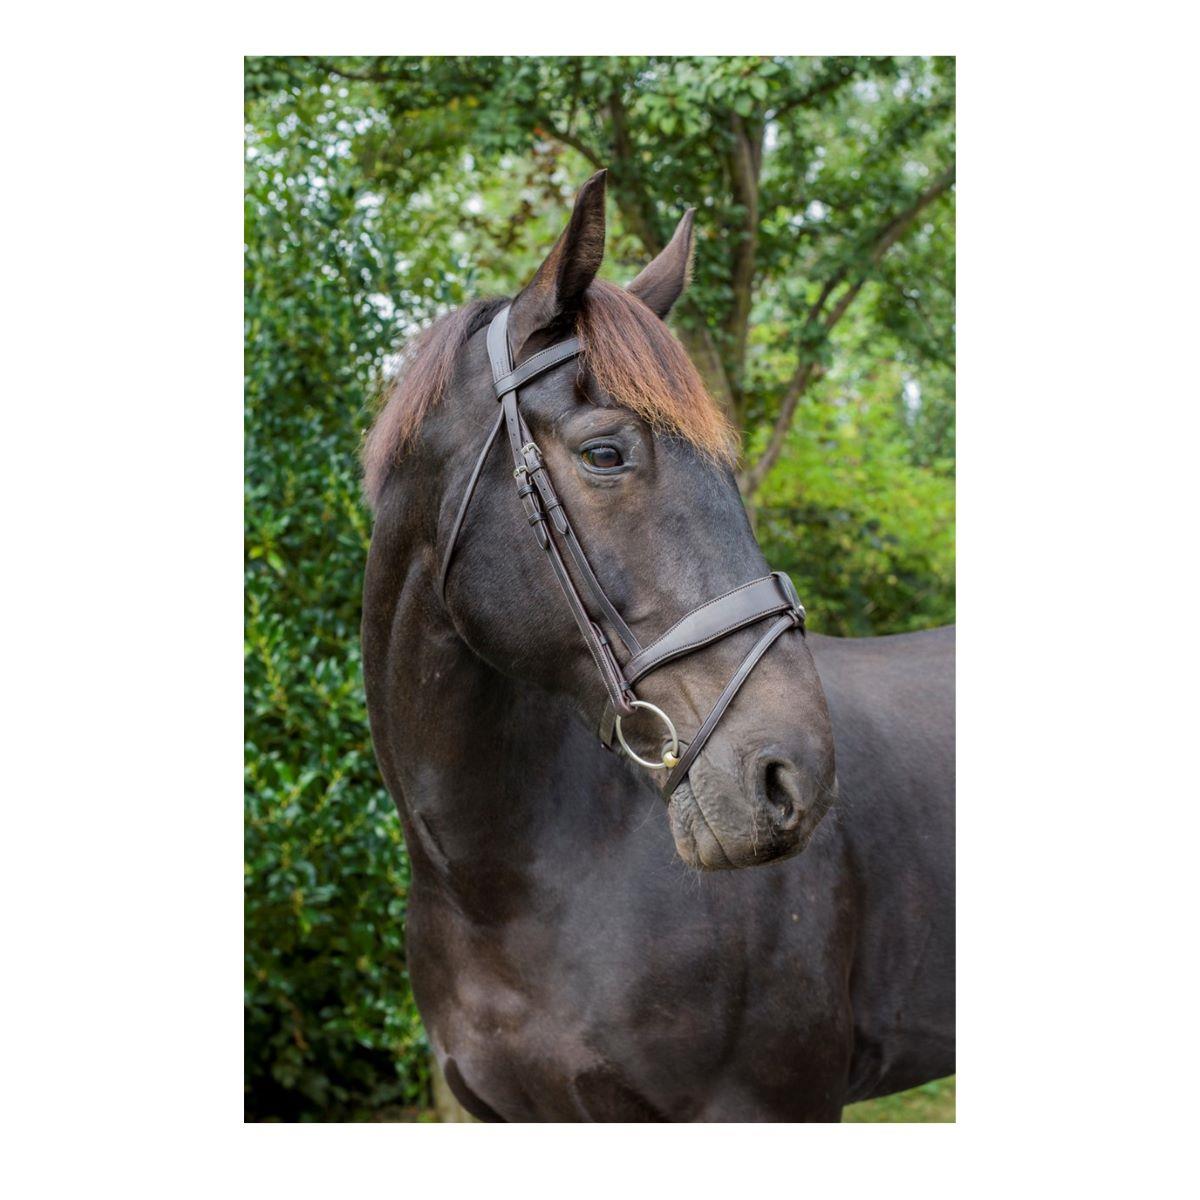 Eco Rider Tullamore Show Bridle: Anatomic Padded Horse Bridle Removable Flash - Just Horse Riders